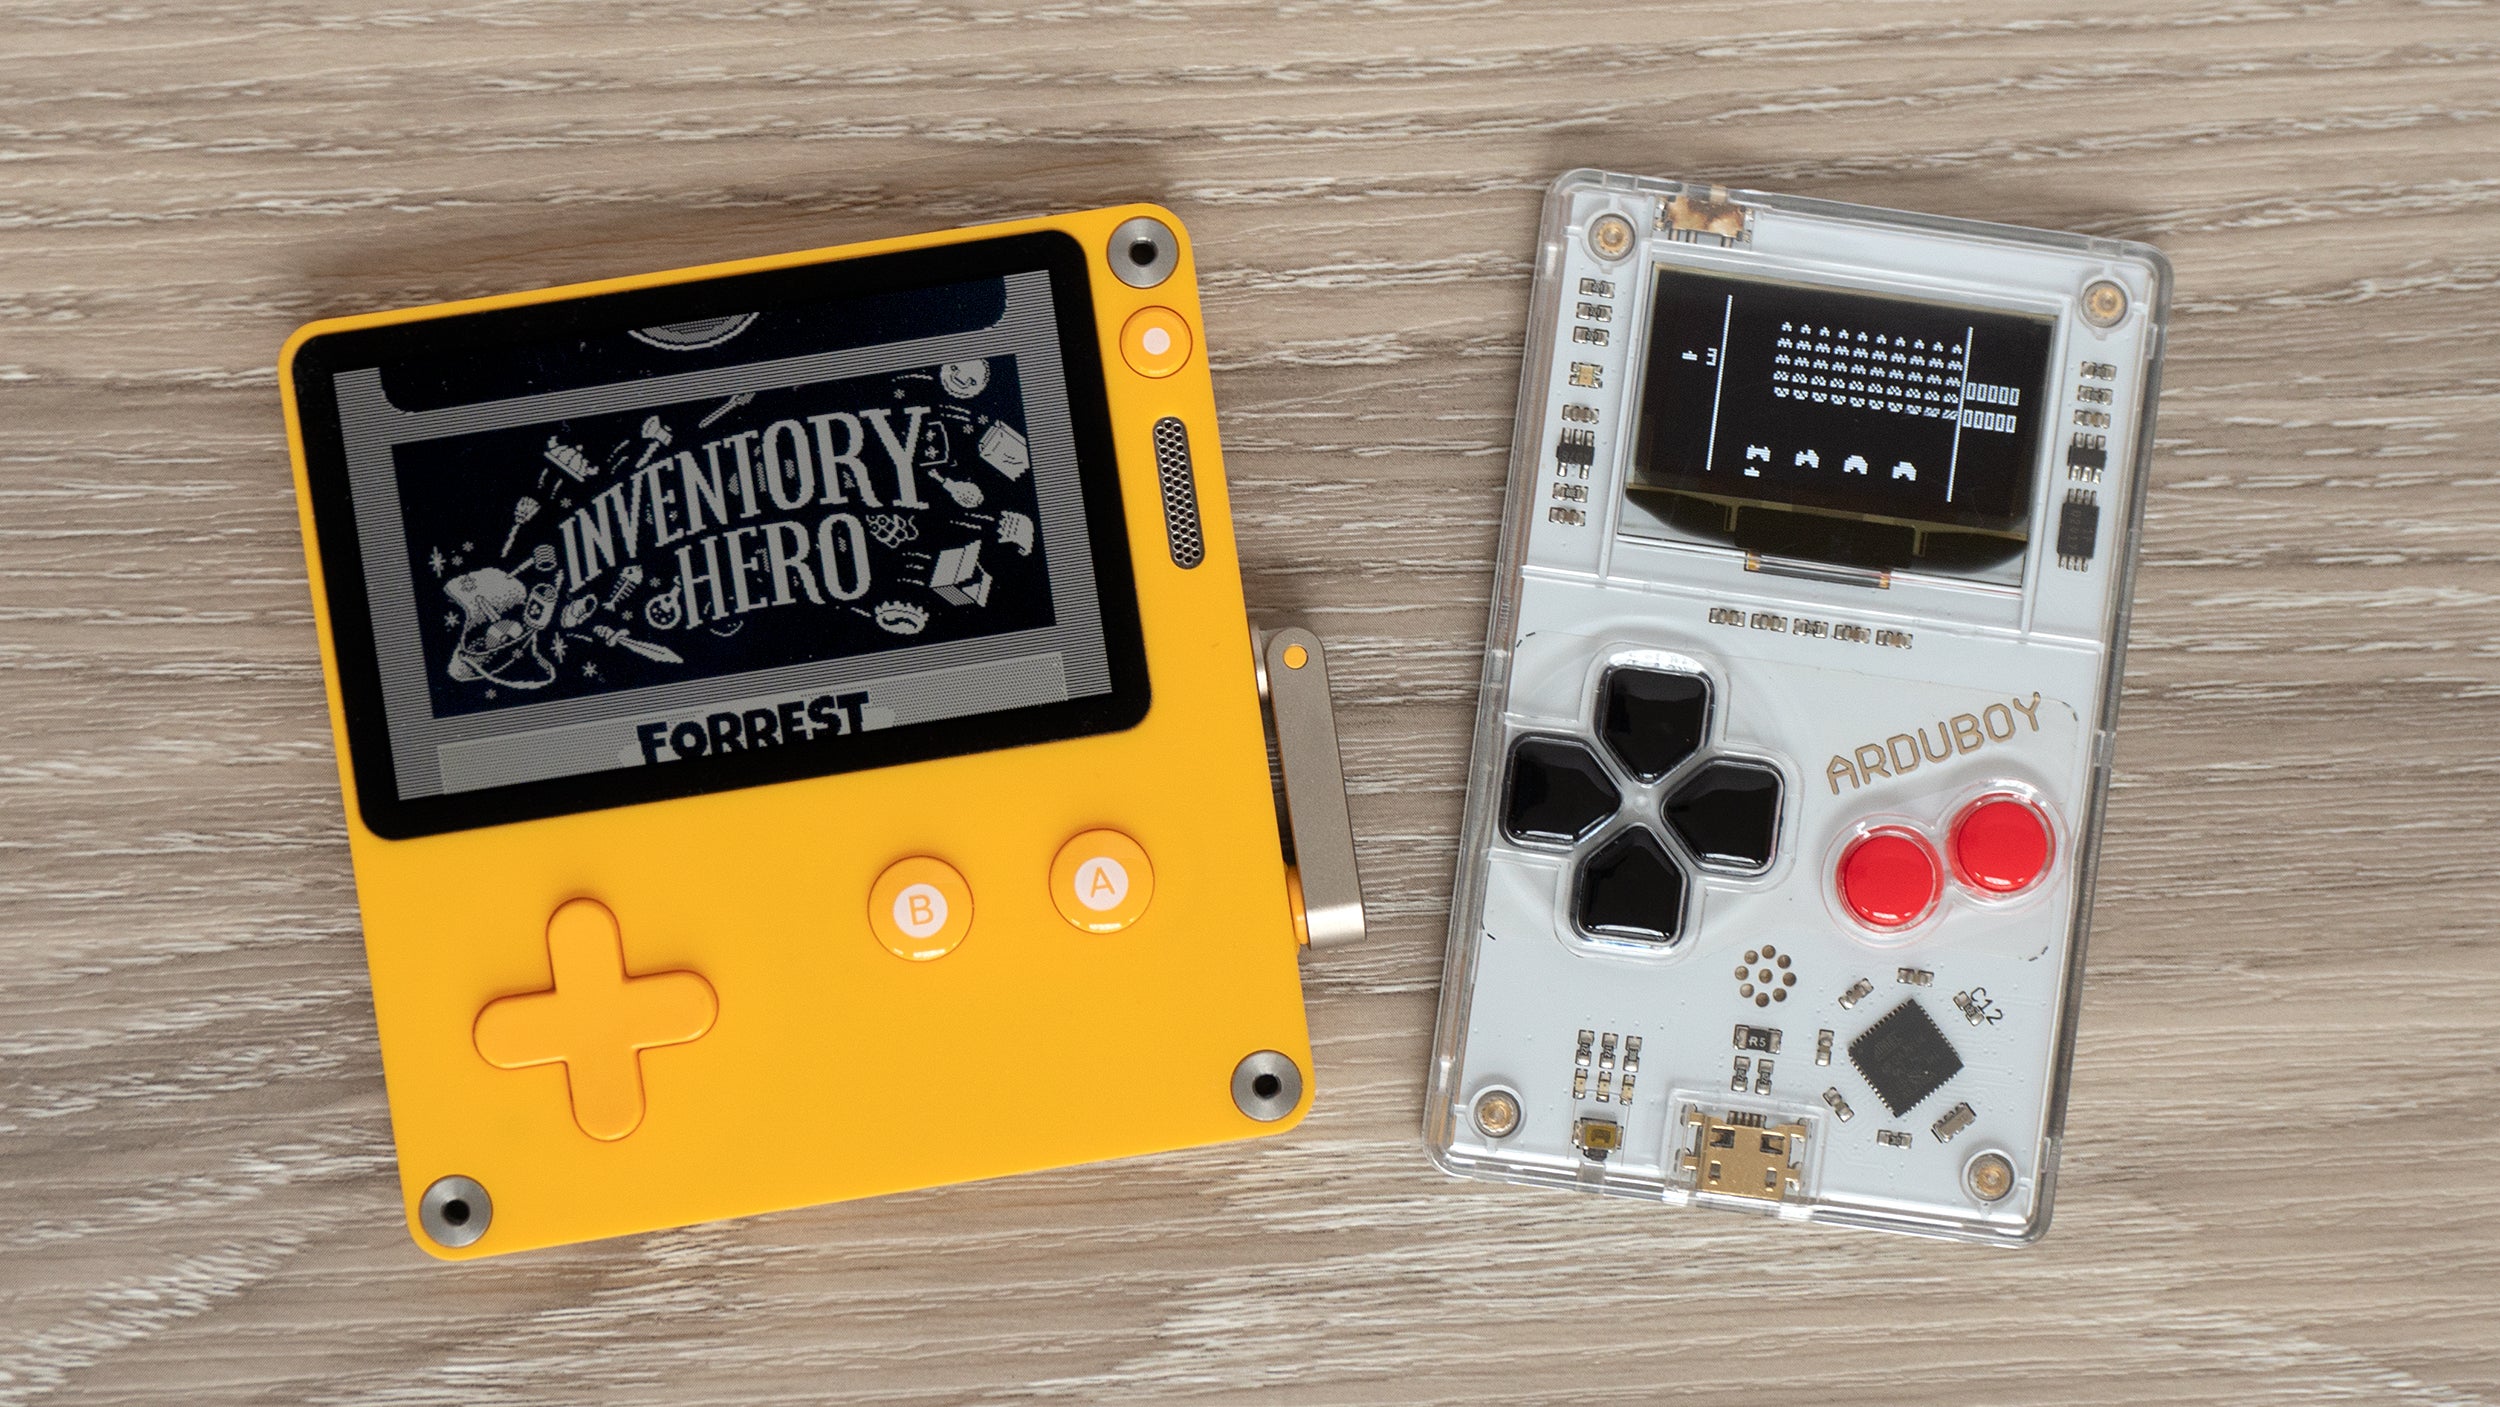 The aesthetic of the Playdate's games is reminiscent of the monochromatic Arduboy's ever-growing library. (Photo: Andrew Liszewski - Gizmodo)